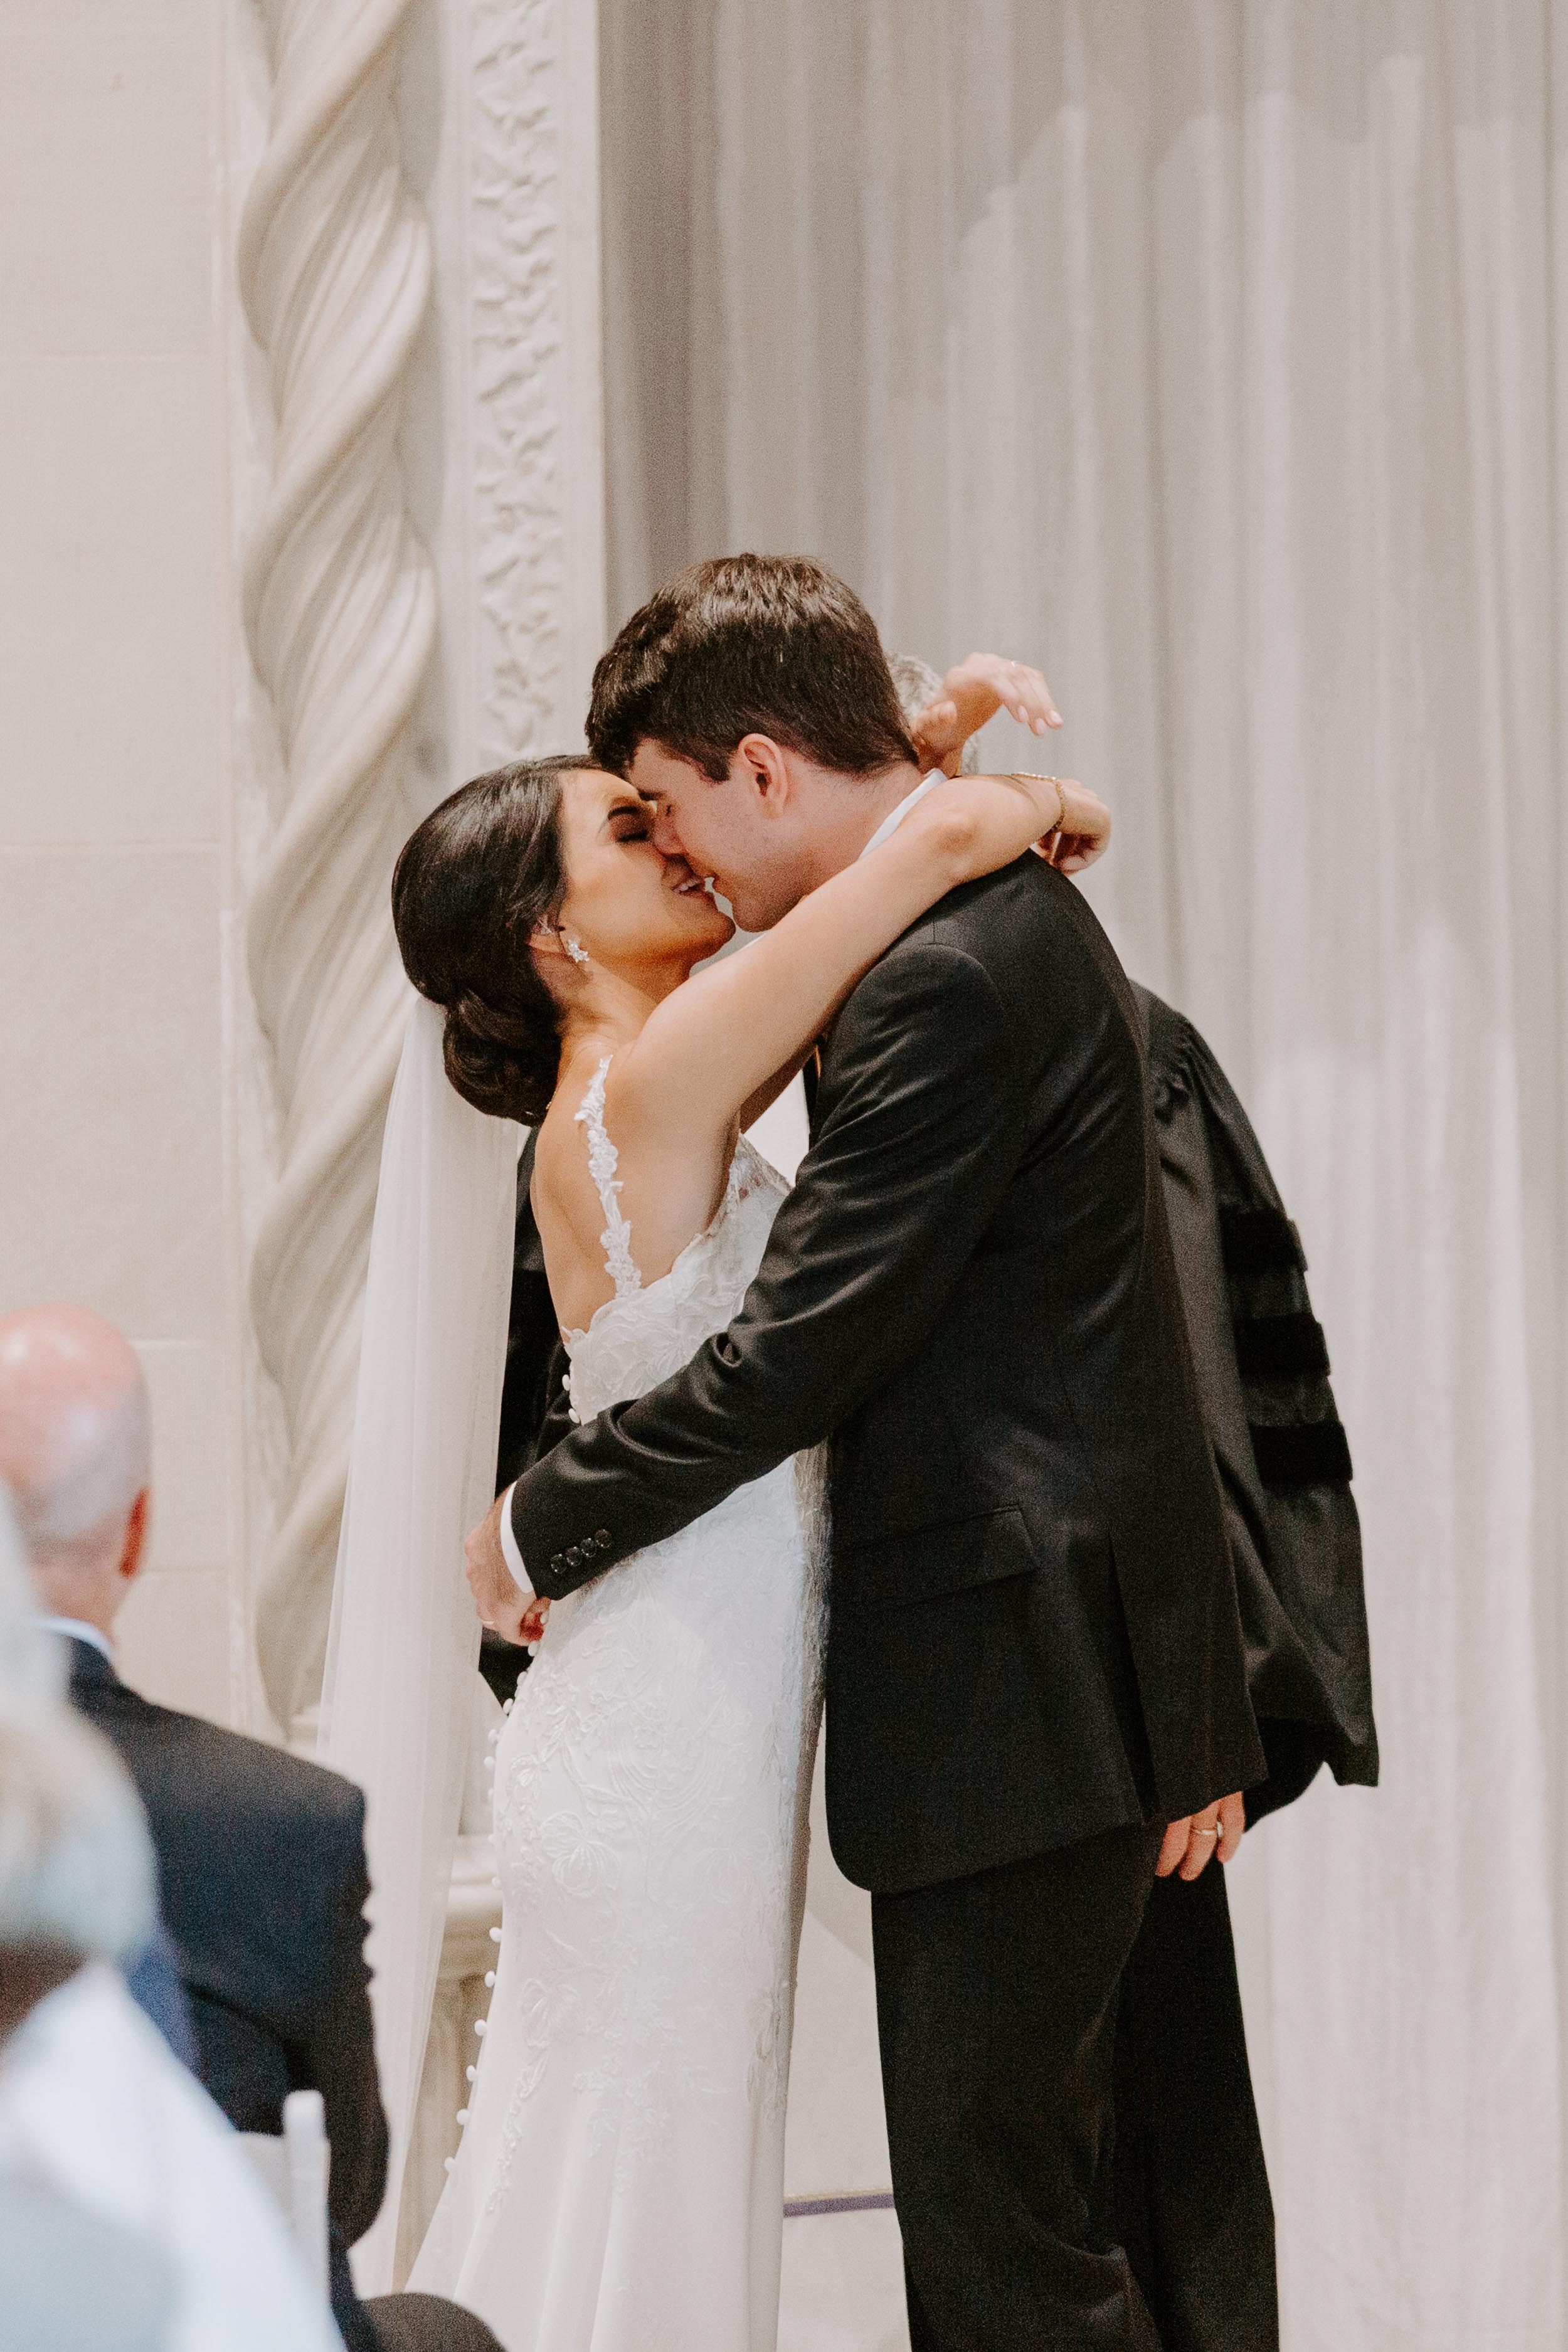 Bride and groom kissing after wedding ceremony at Dayton Art Institute Wedding
